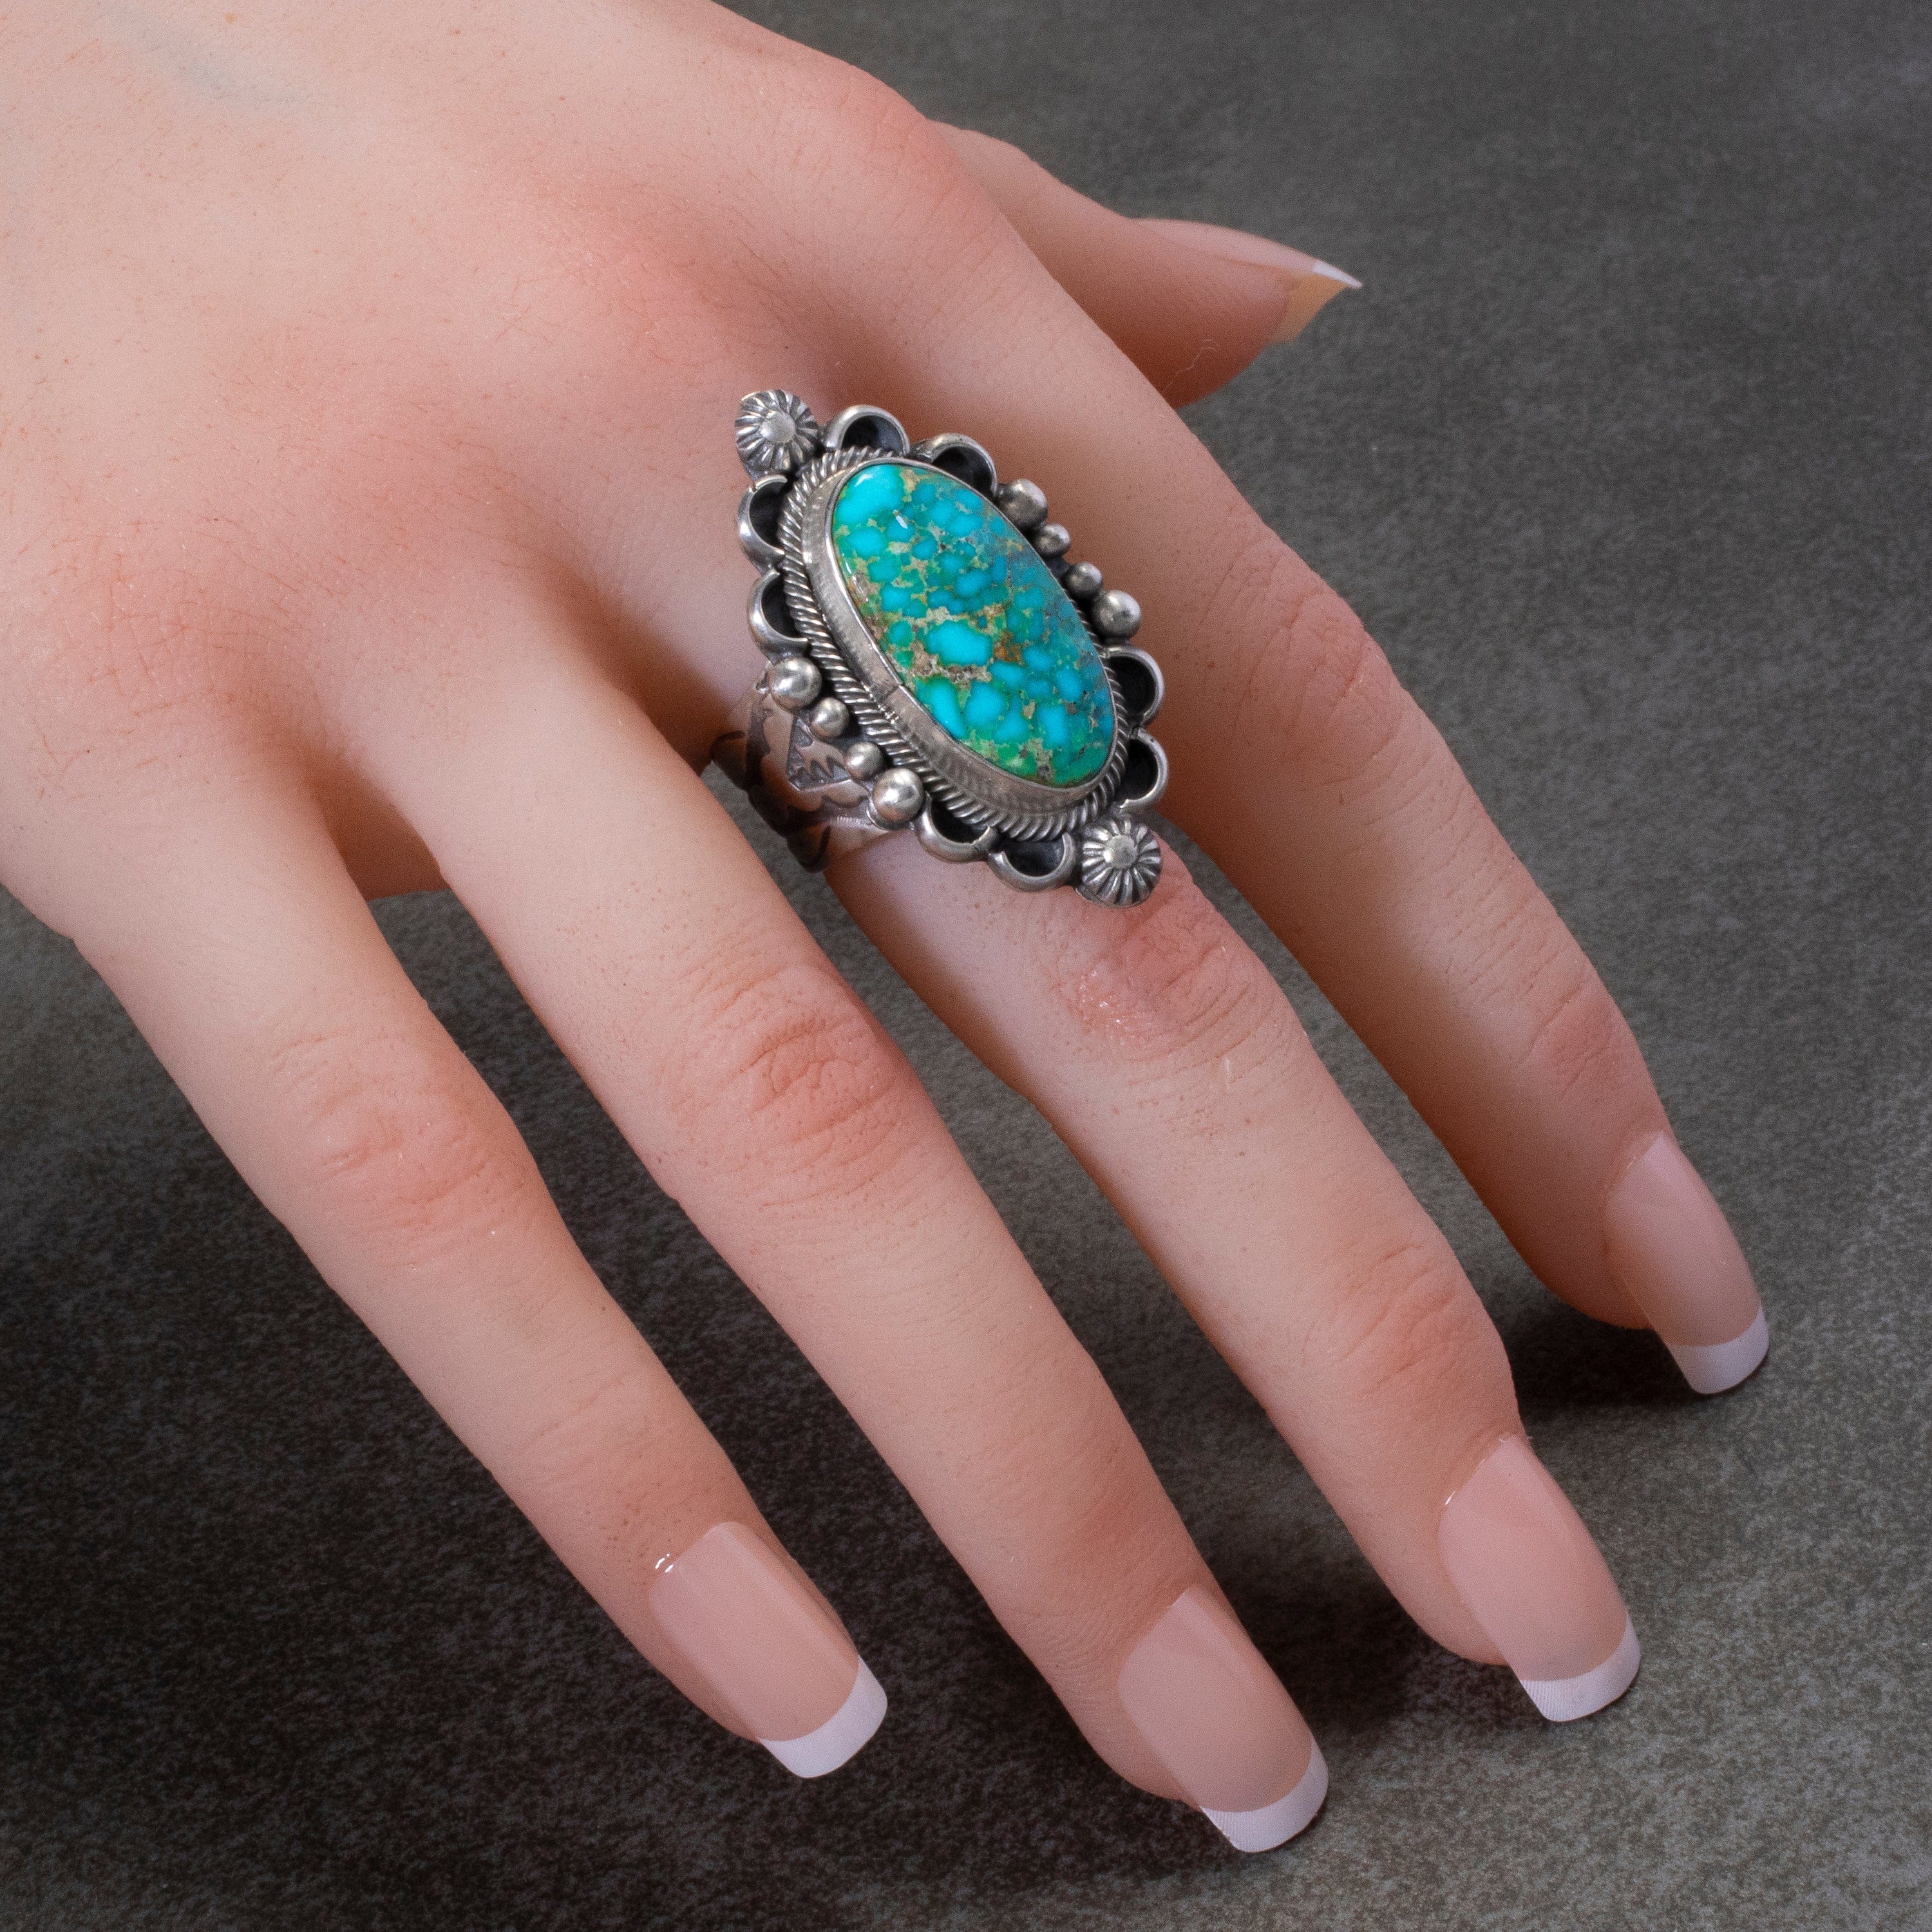 Kalifano Native American Jewelry 9 Danny Clark Navajo Sonoran Gold Turquoise USA Native American Made 925 Sterling Silver Ring NAR1600.004.9